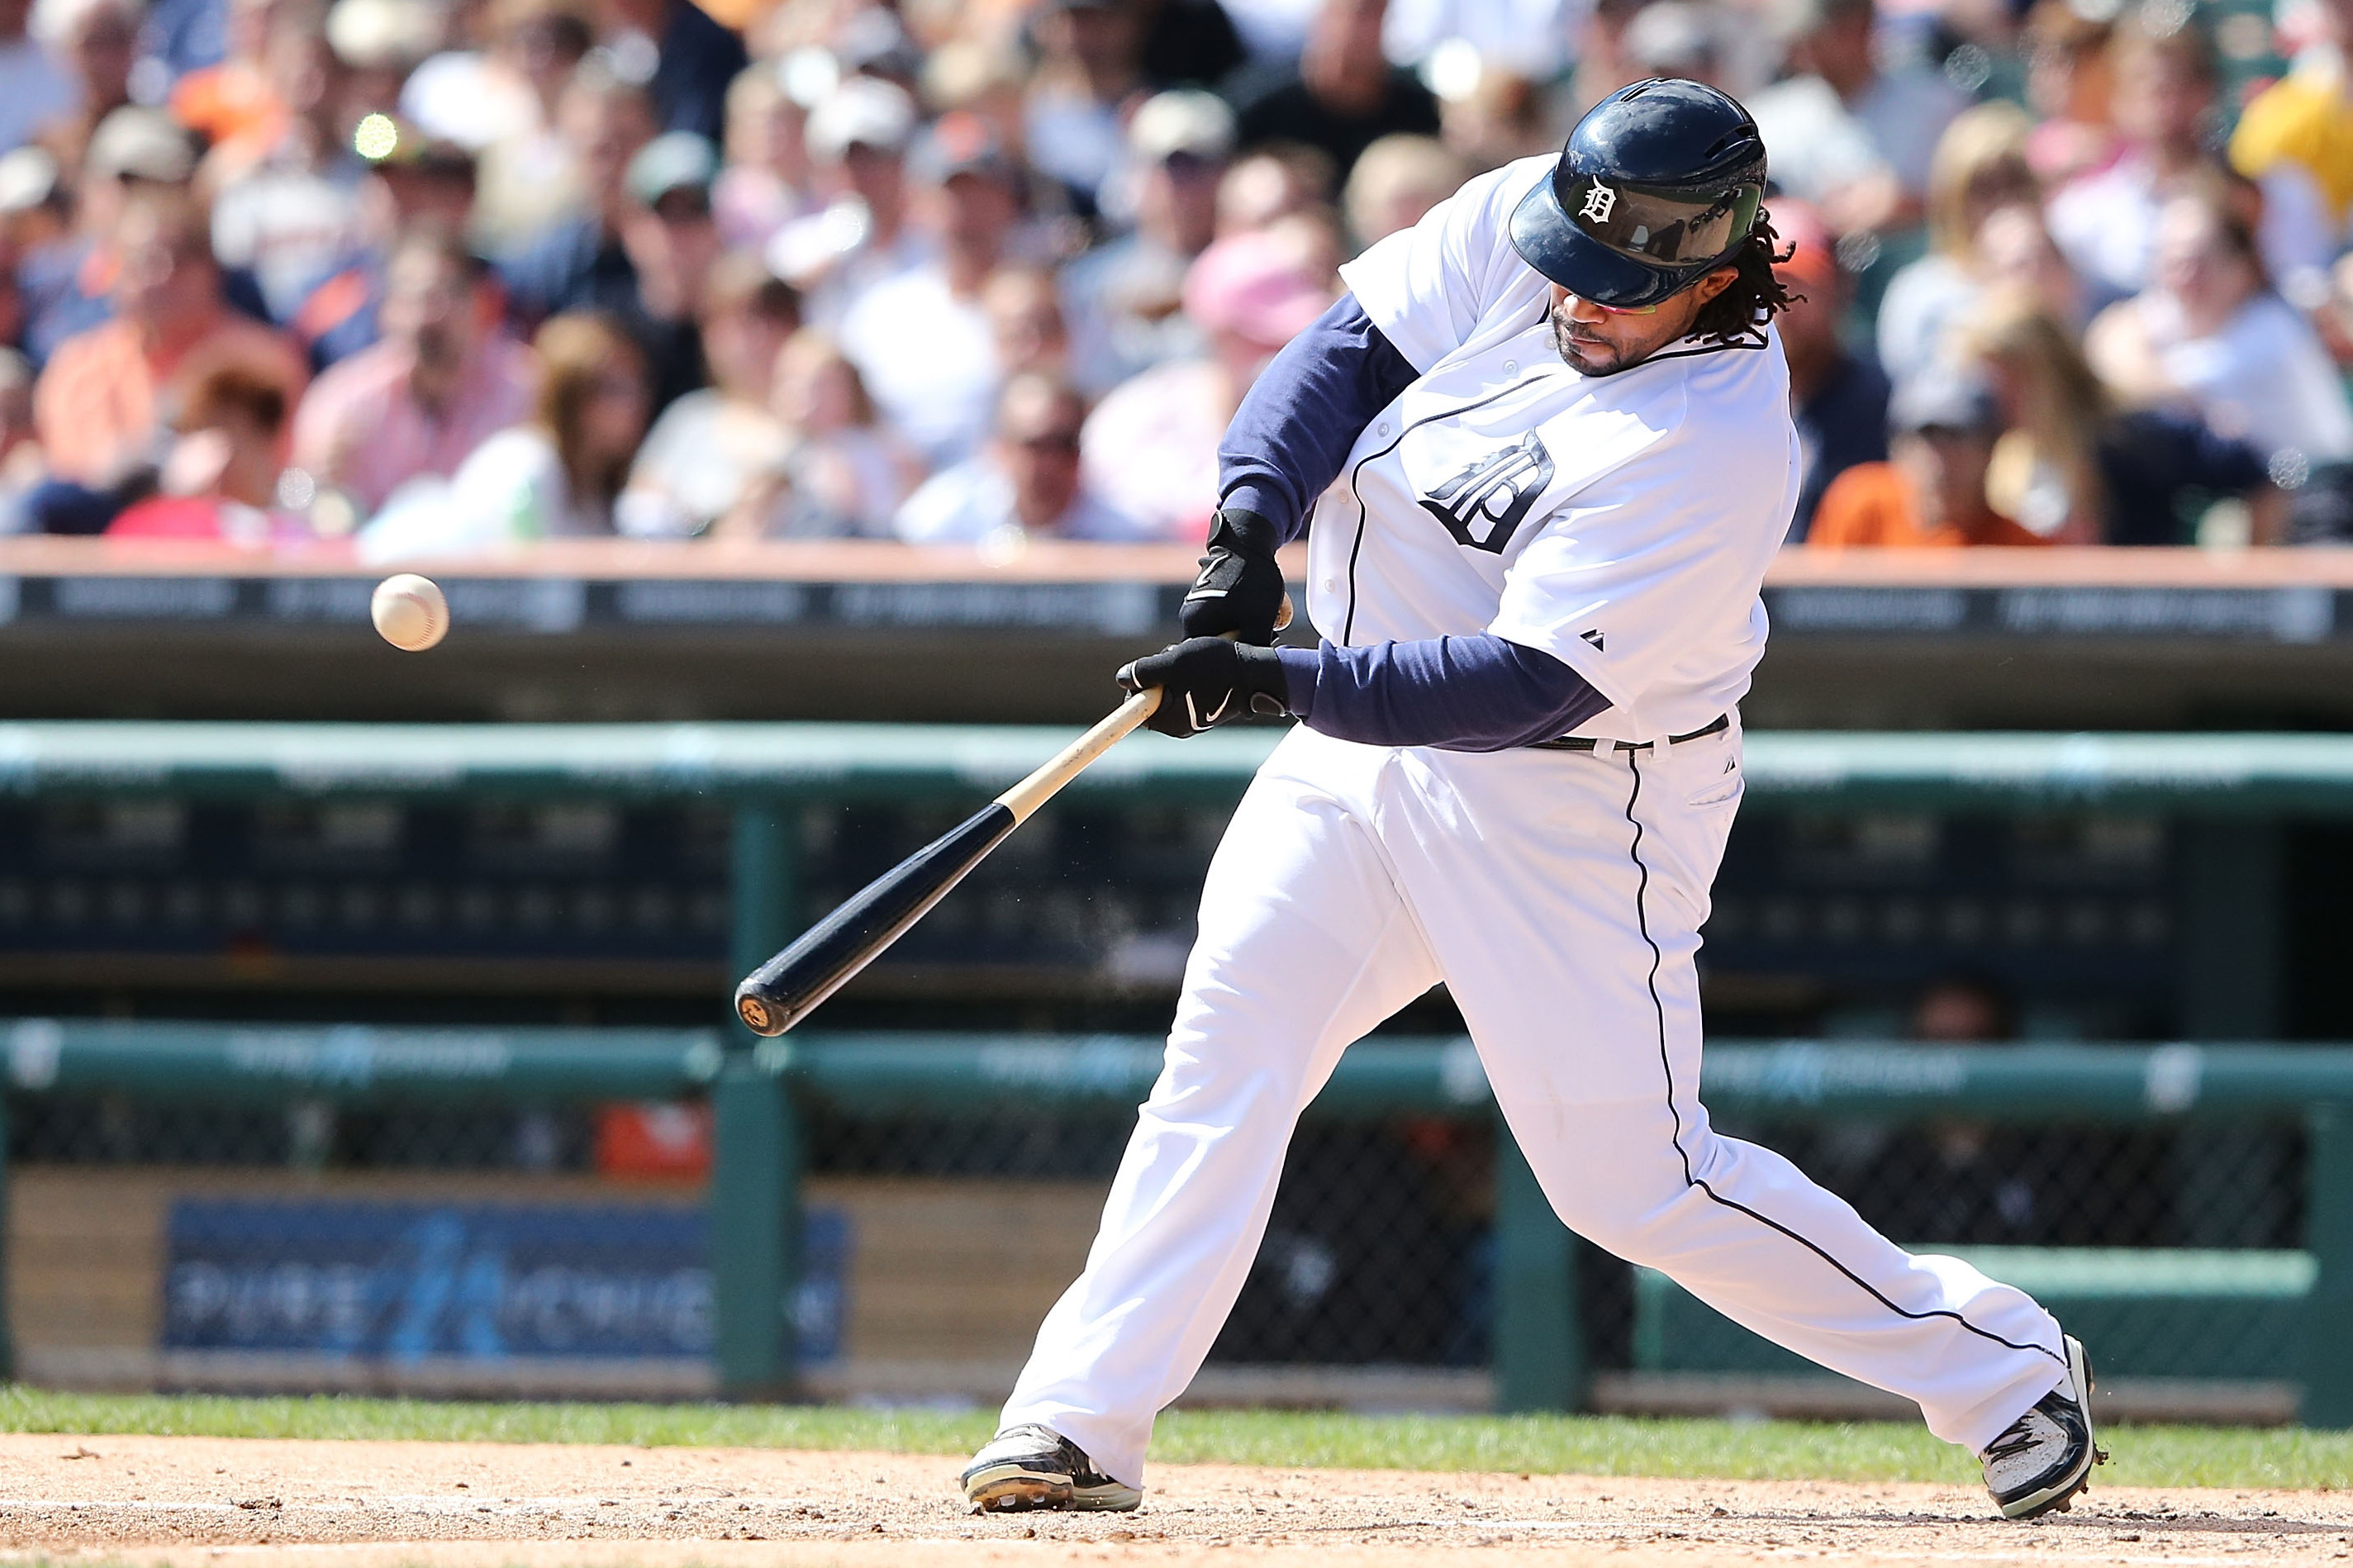 Prince Fielder goes big at the Home Run Derby as Cano swings and